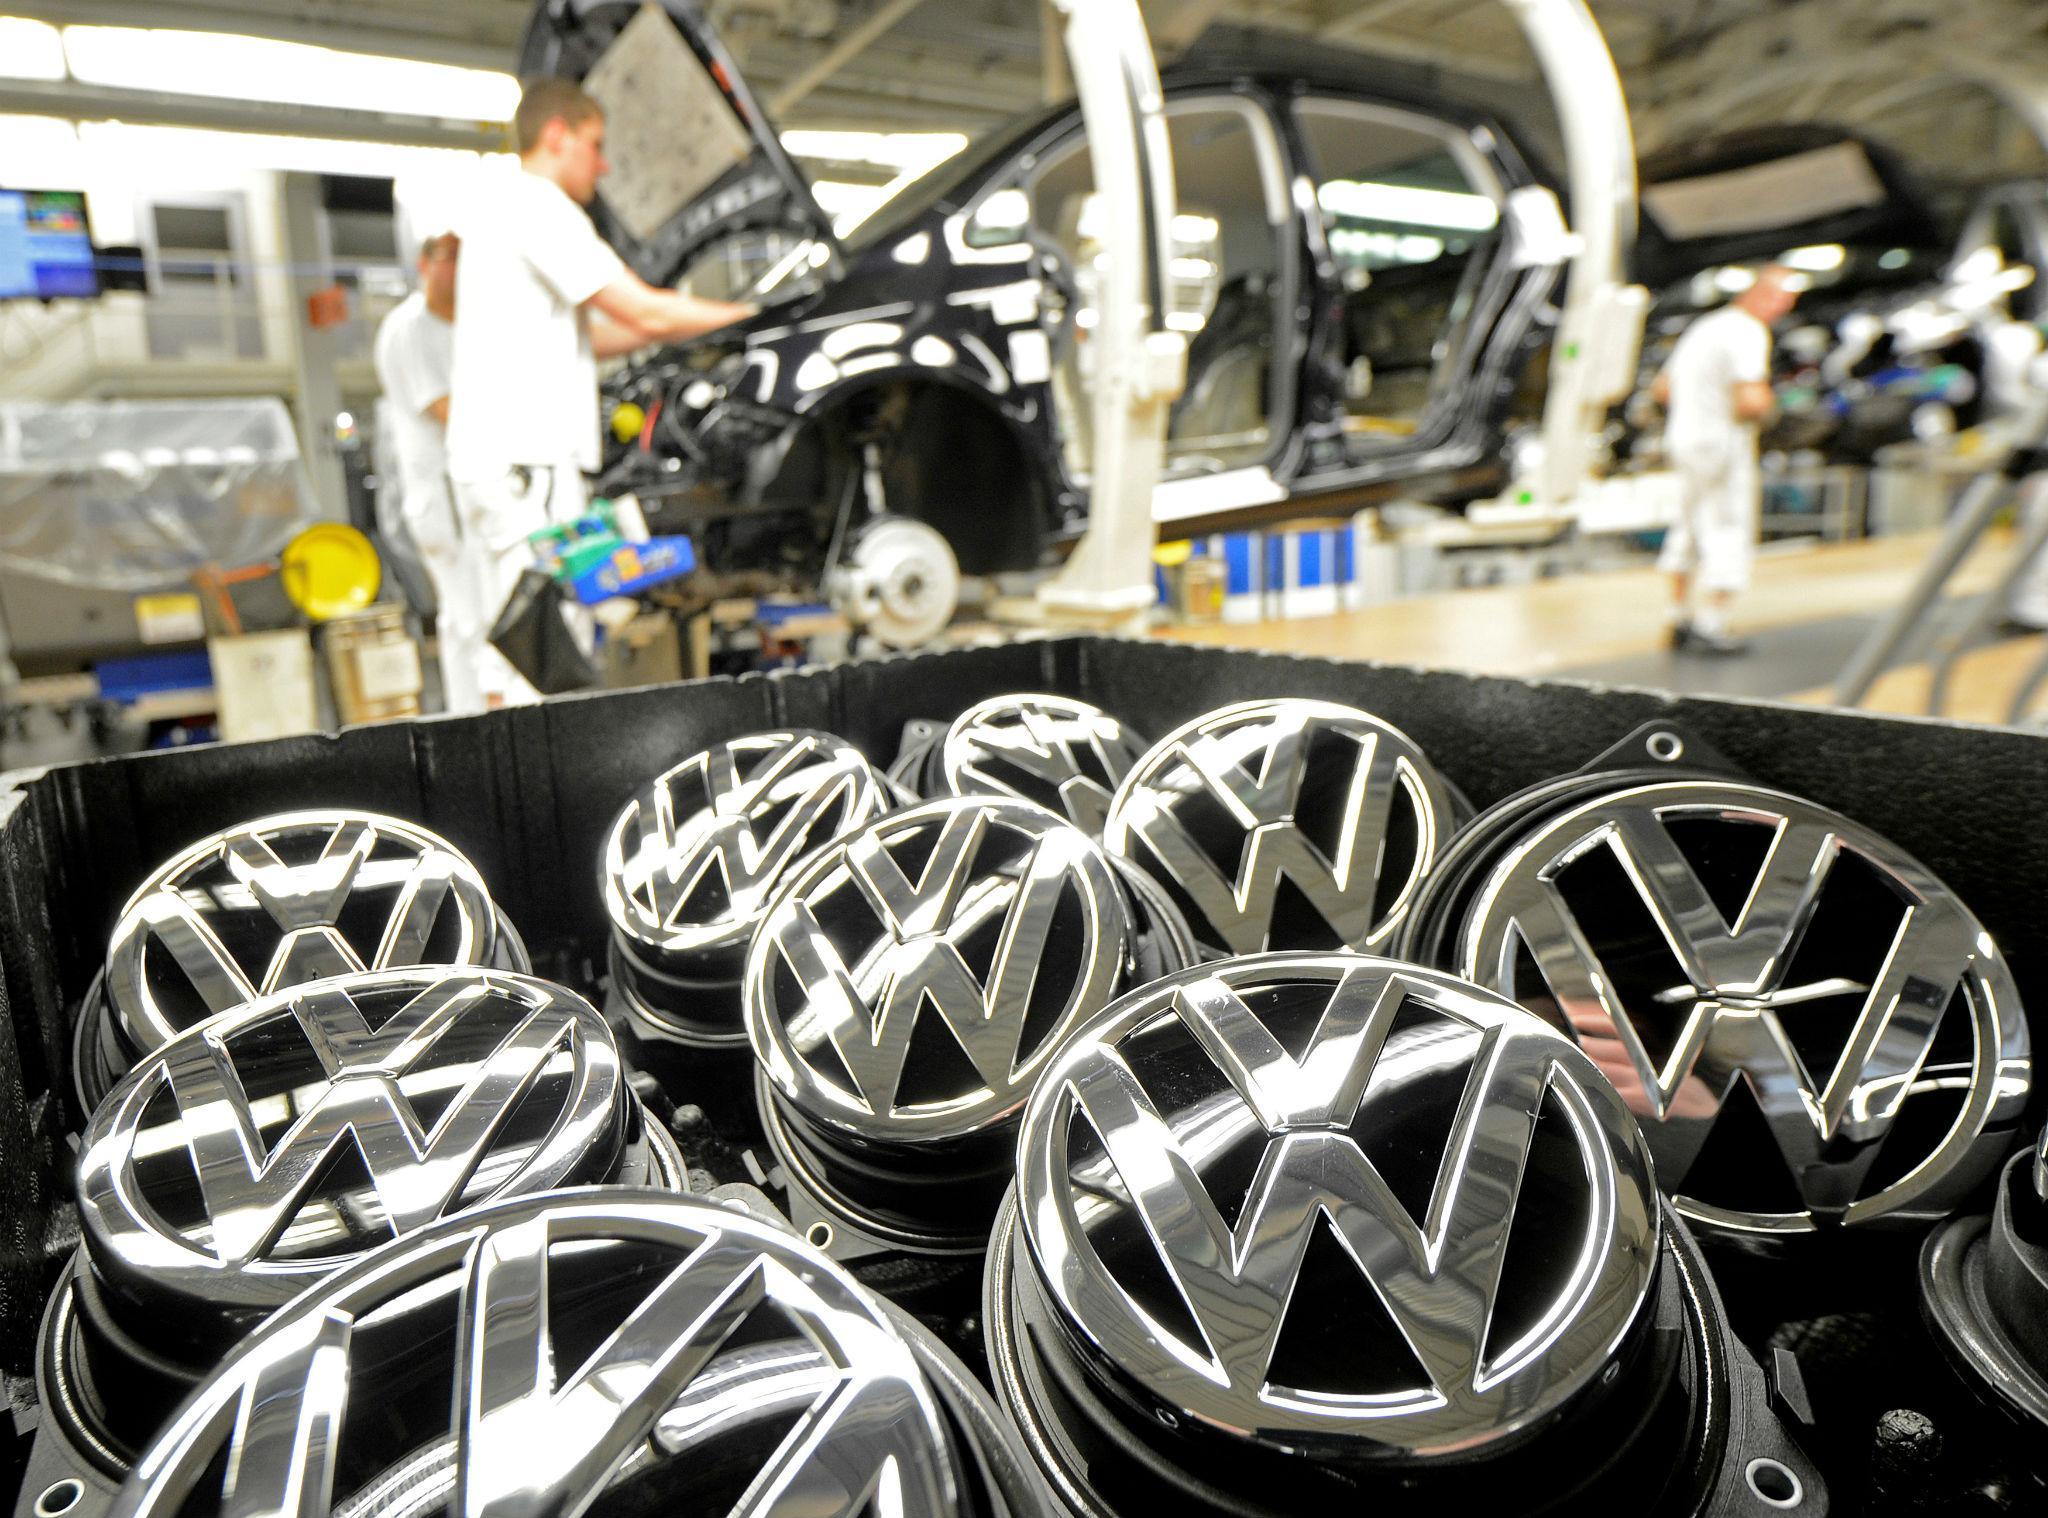 A Volkswagen production line in Wolfsburg, Germany. The company is holding crisis talks as production grinds to a halt